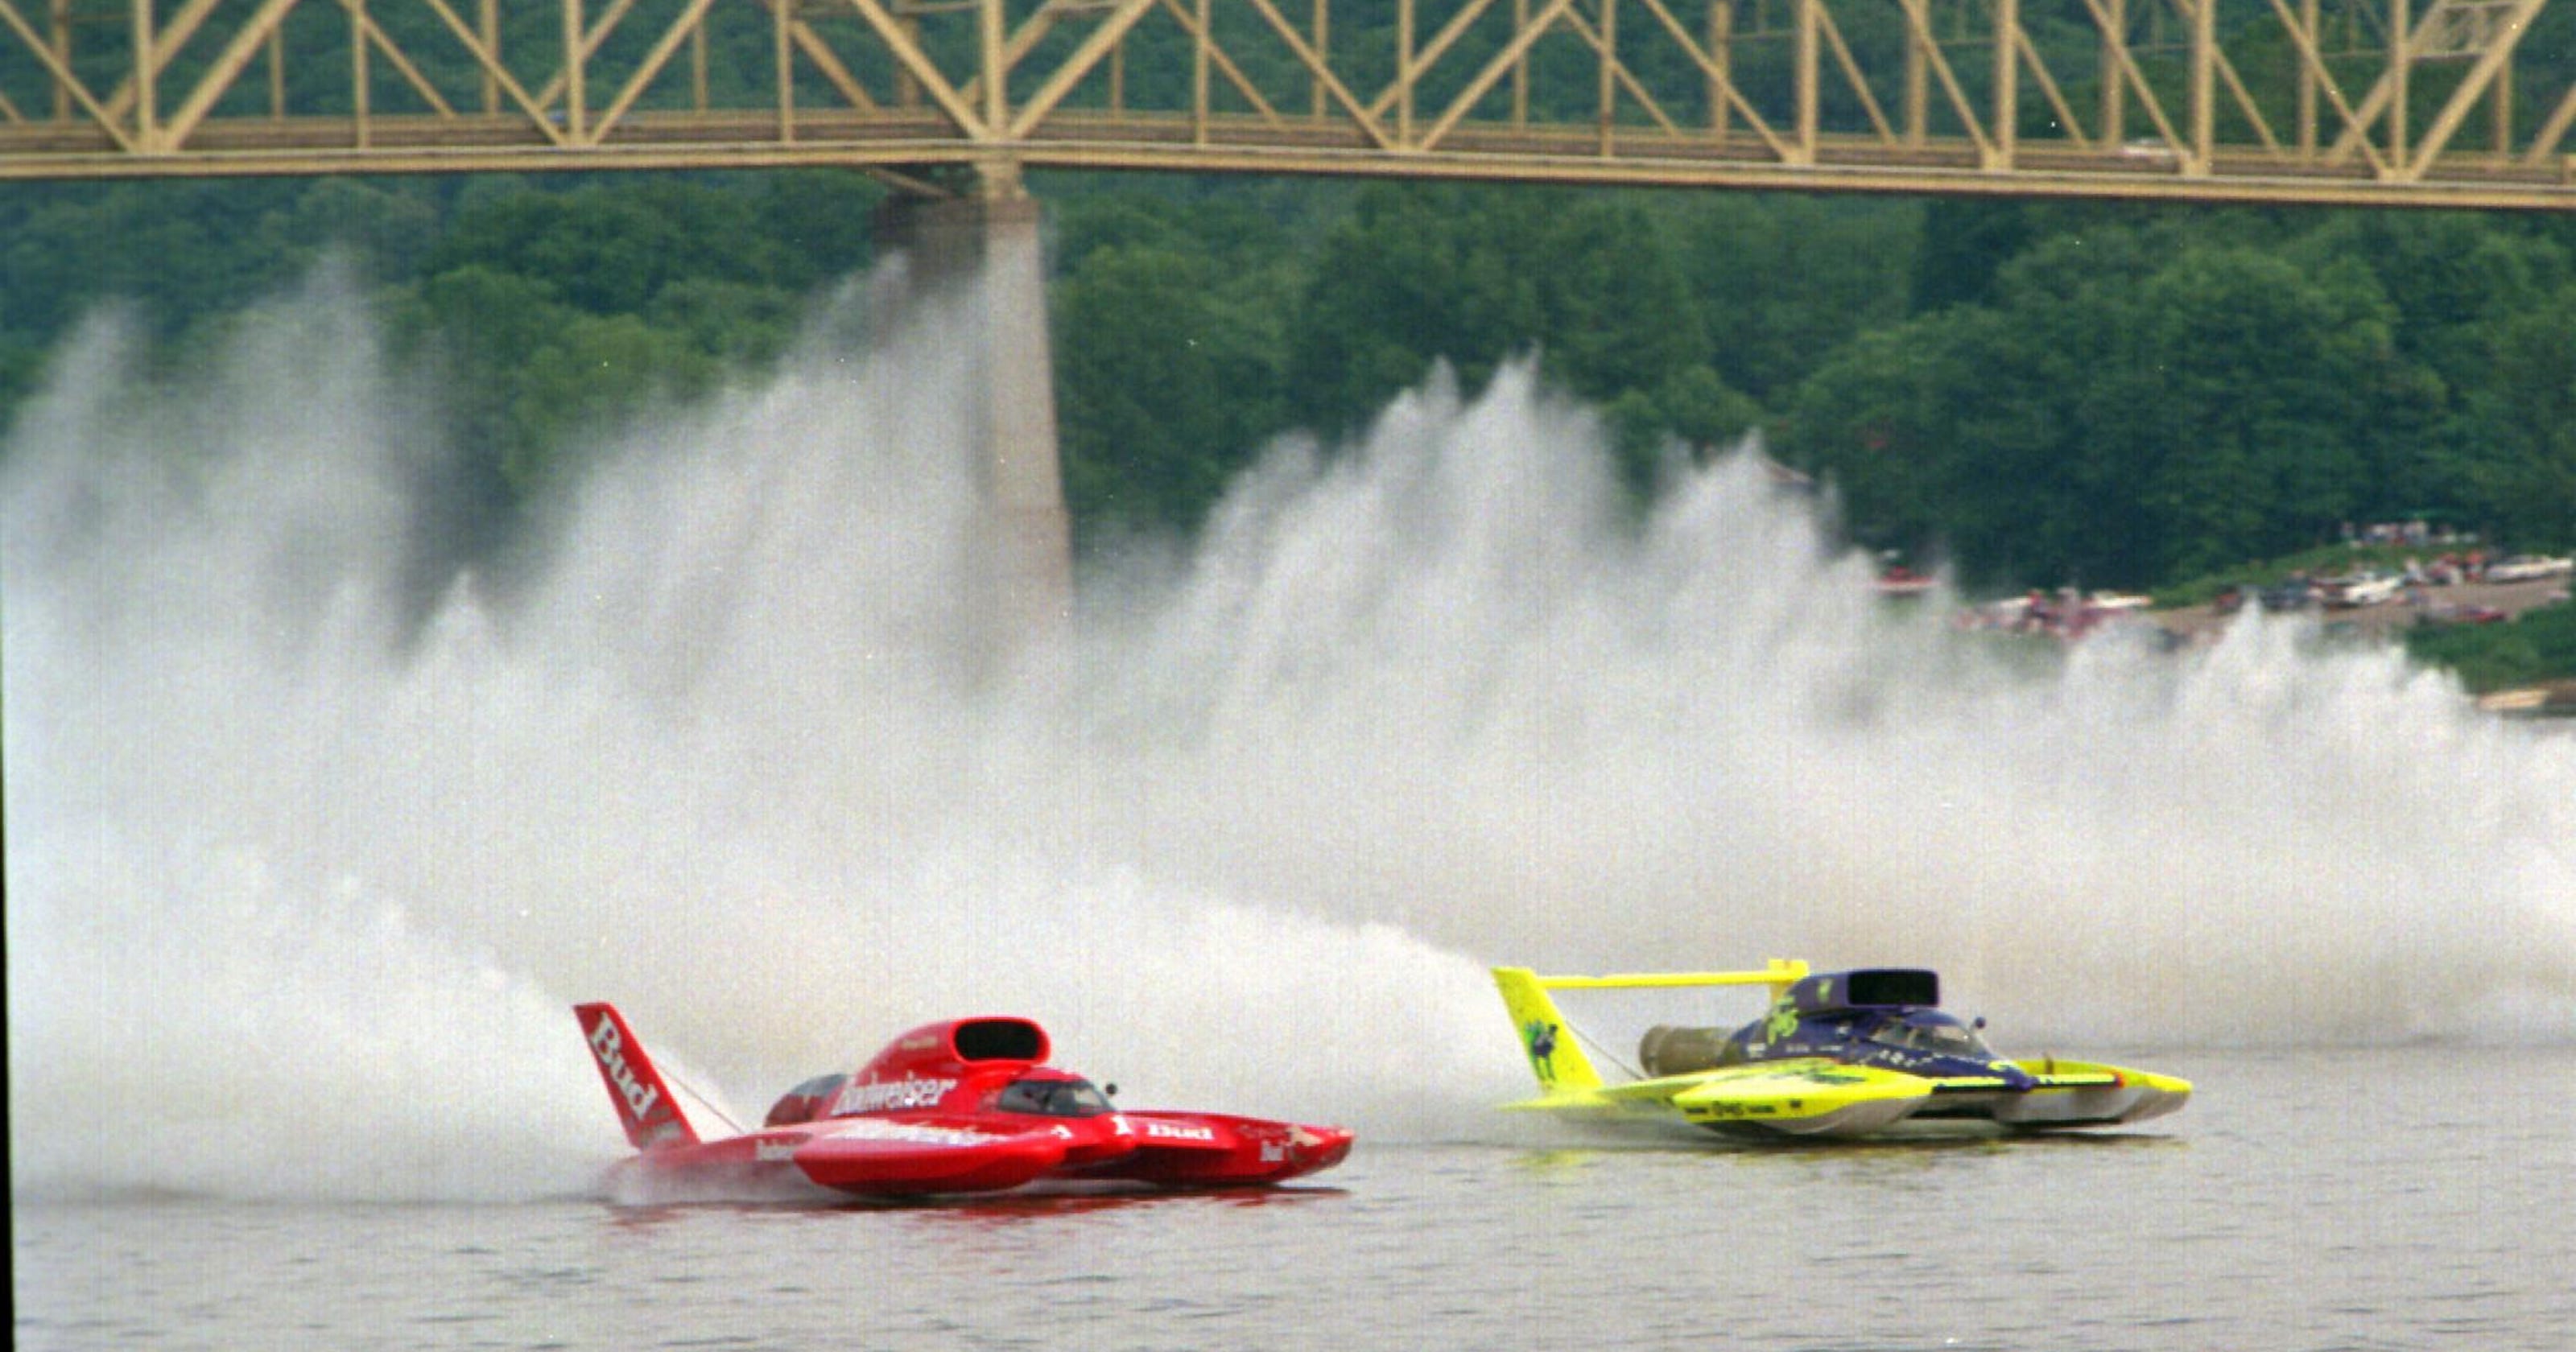 Madison Regatta Can a dead man save this hydroplane race?